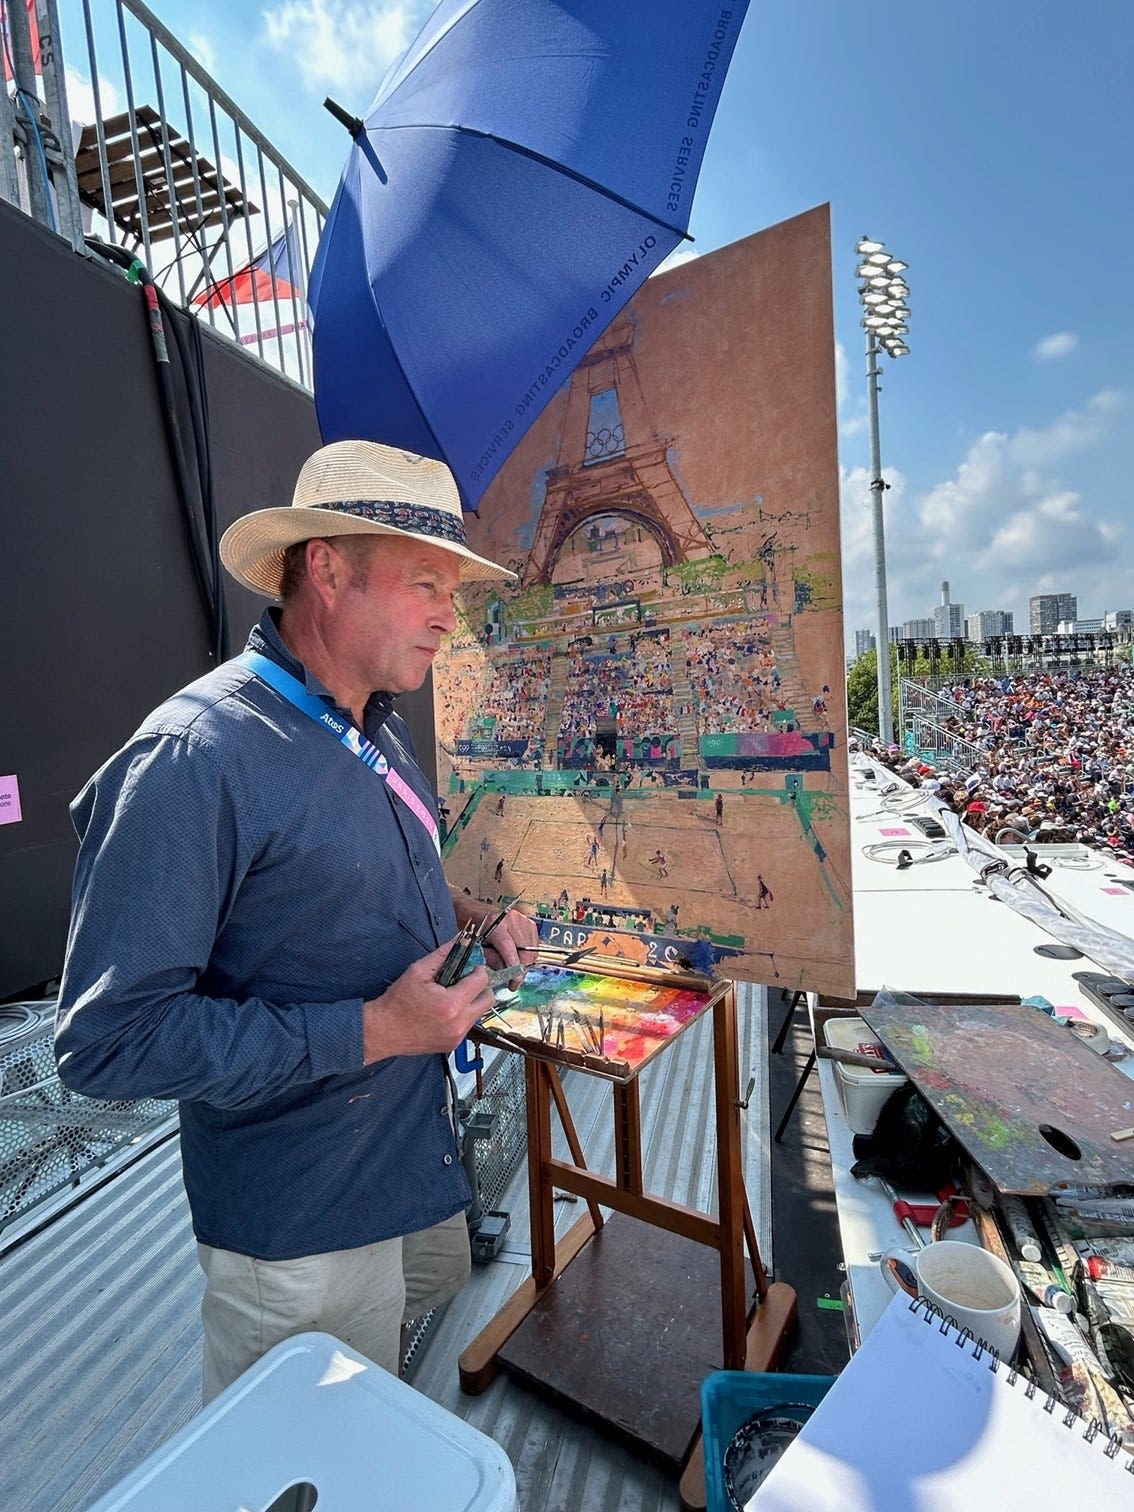 Meet the painter with the best seat at one of Paris Olympics most iconic venues